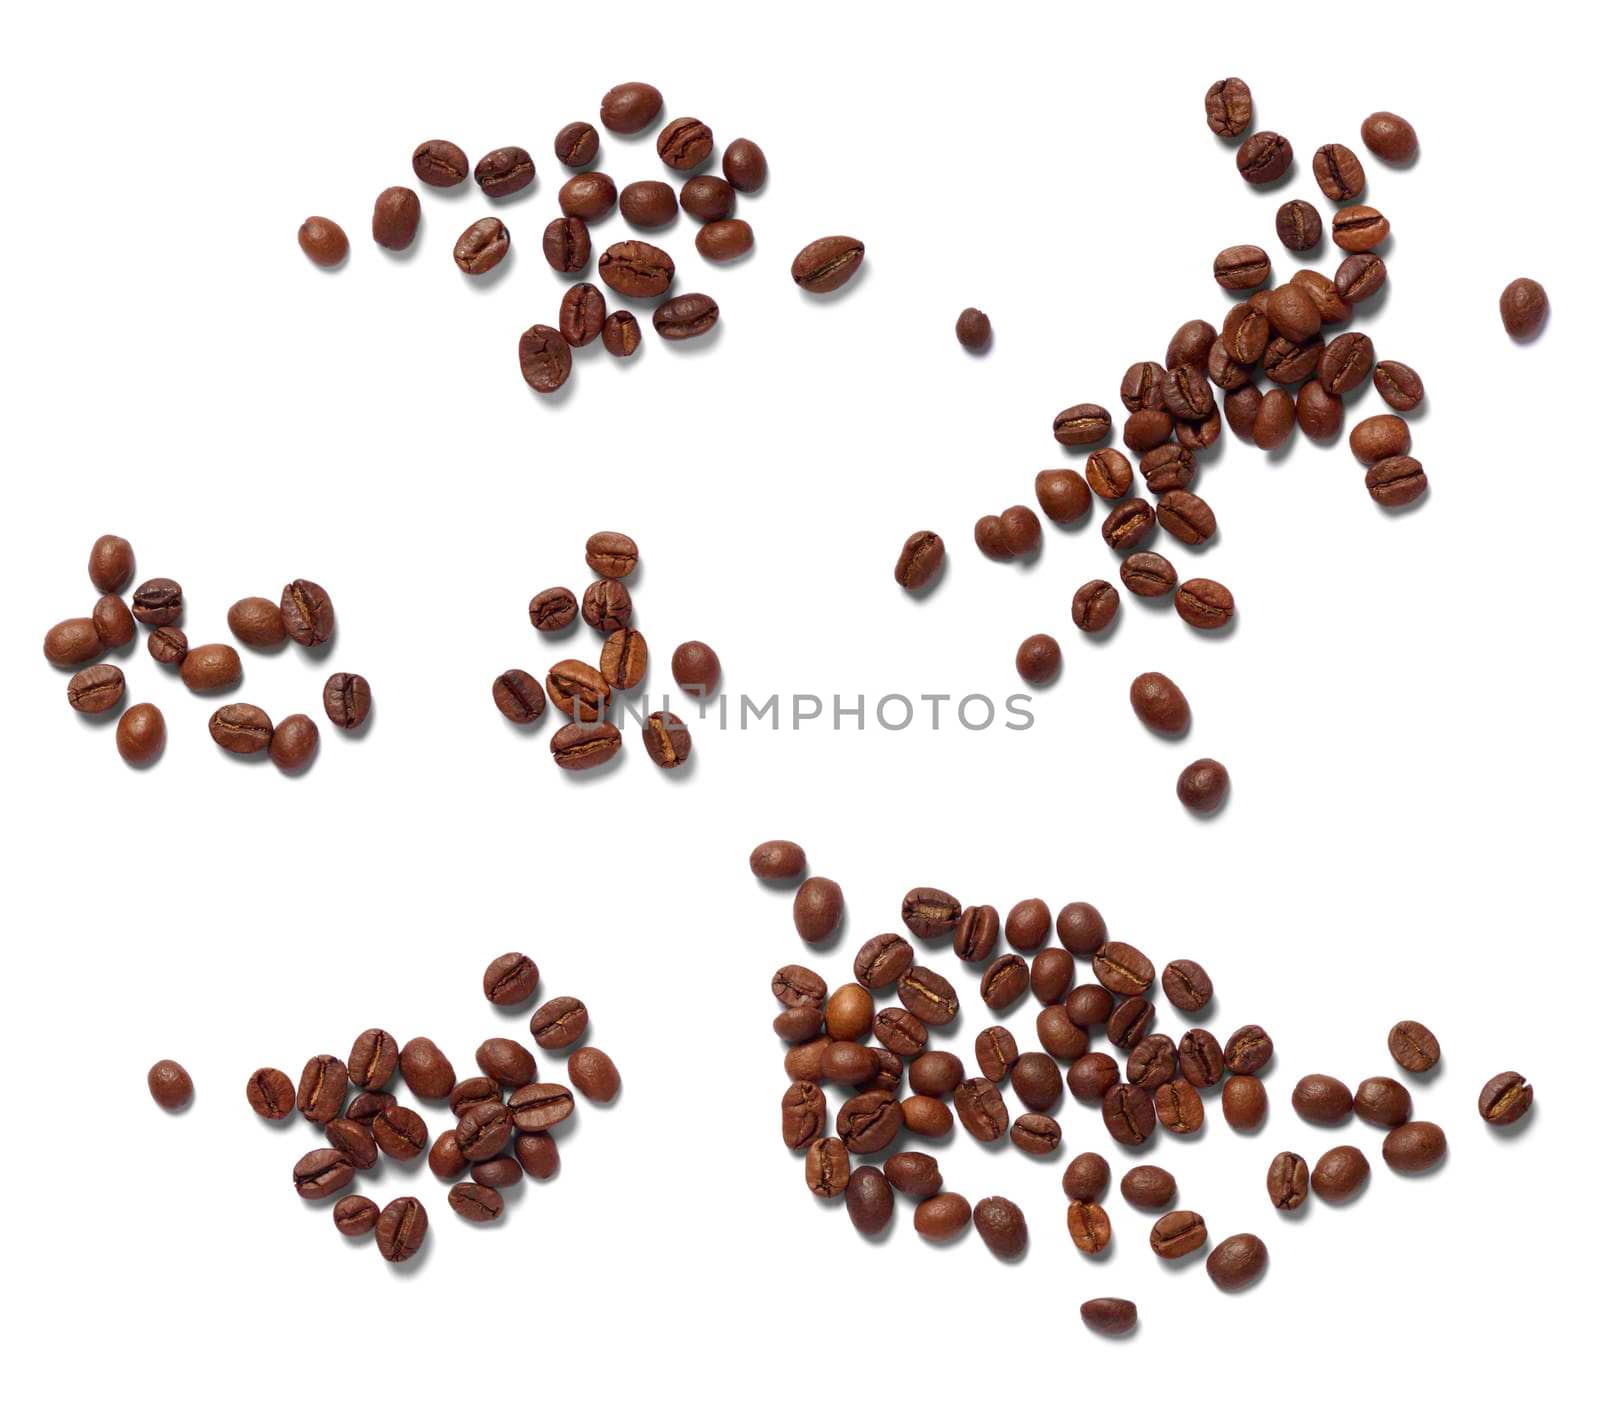 coffee bean brown roasted caffeine espresso seed group many drink black cafe beverage mocha by Picsfive